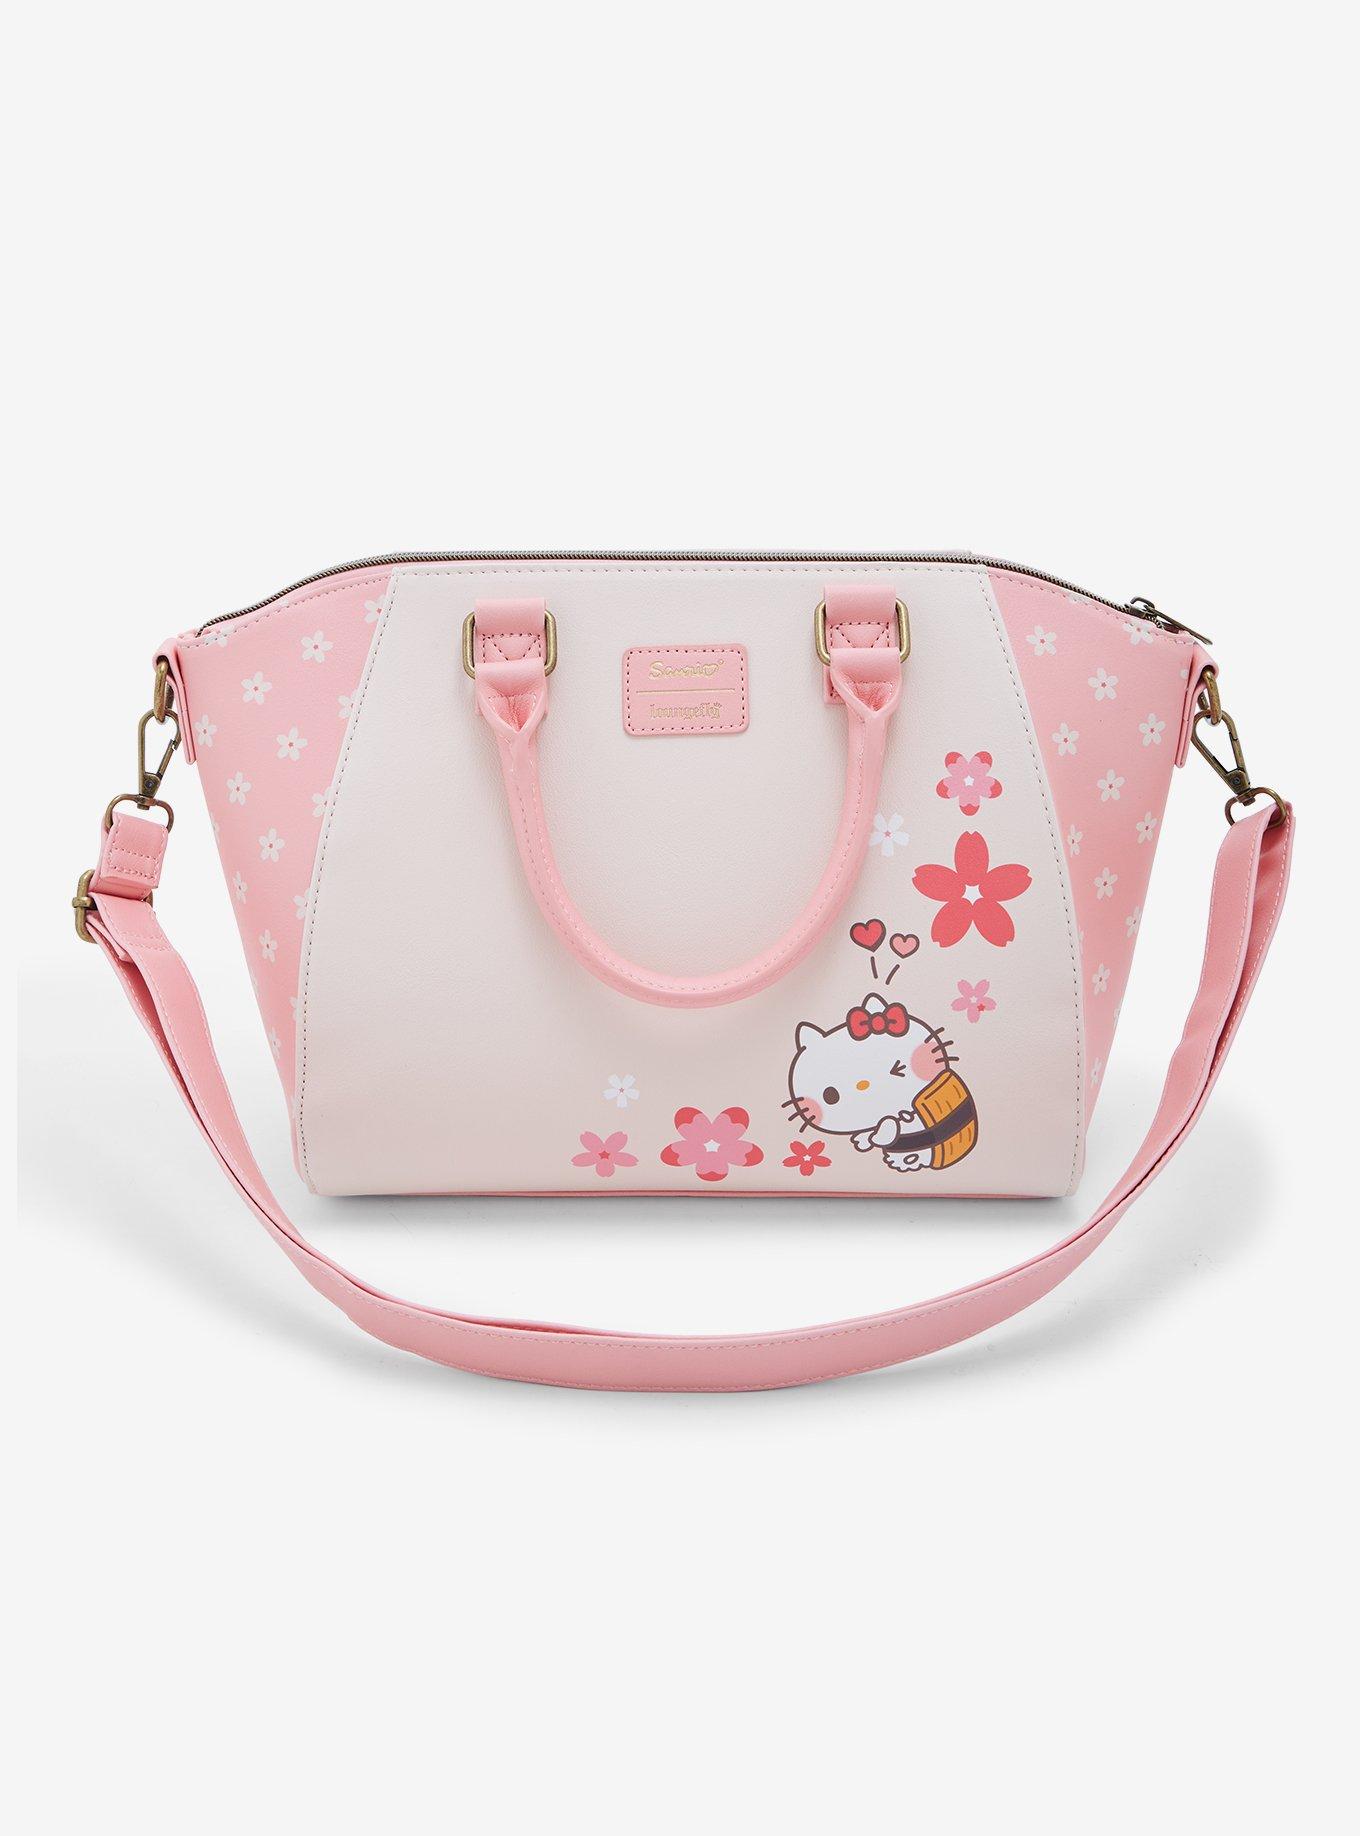 Hello Kitty x Loungefly Boston Bag - Bags and Purses - Lace Market